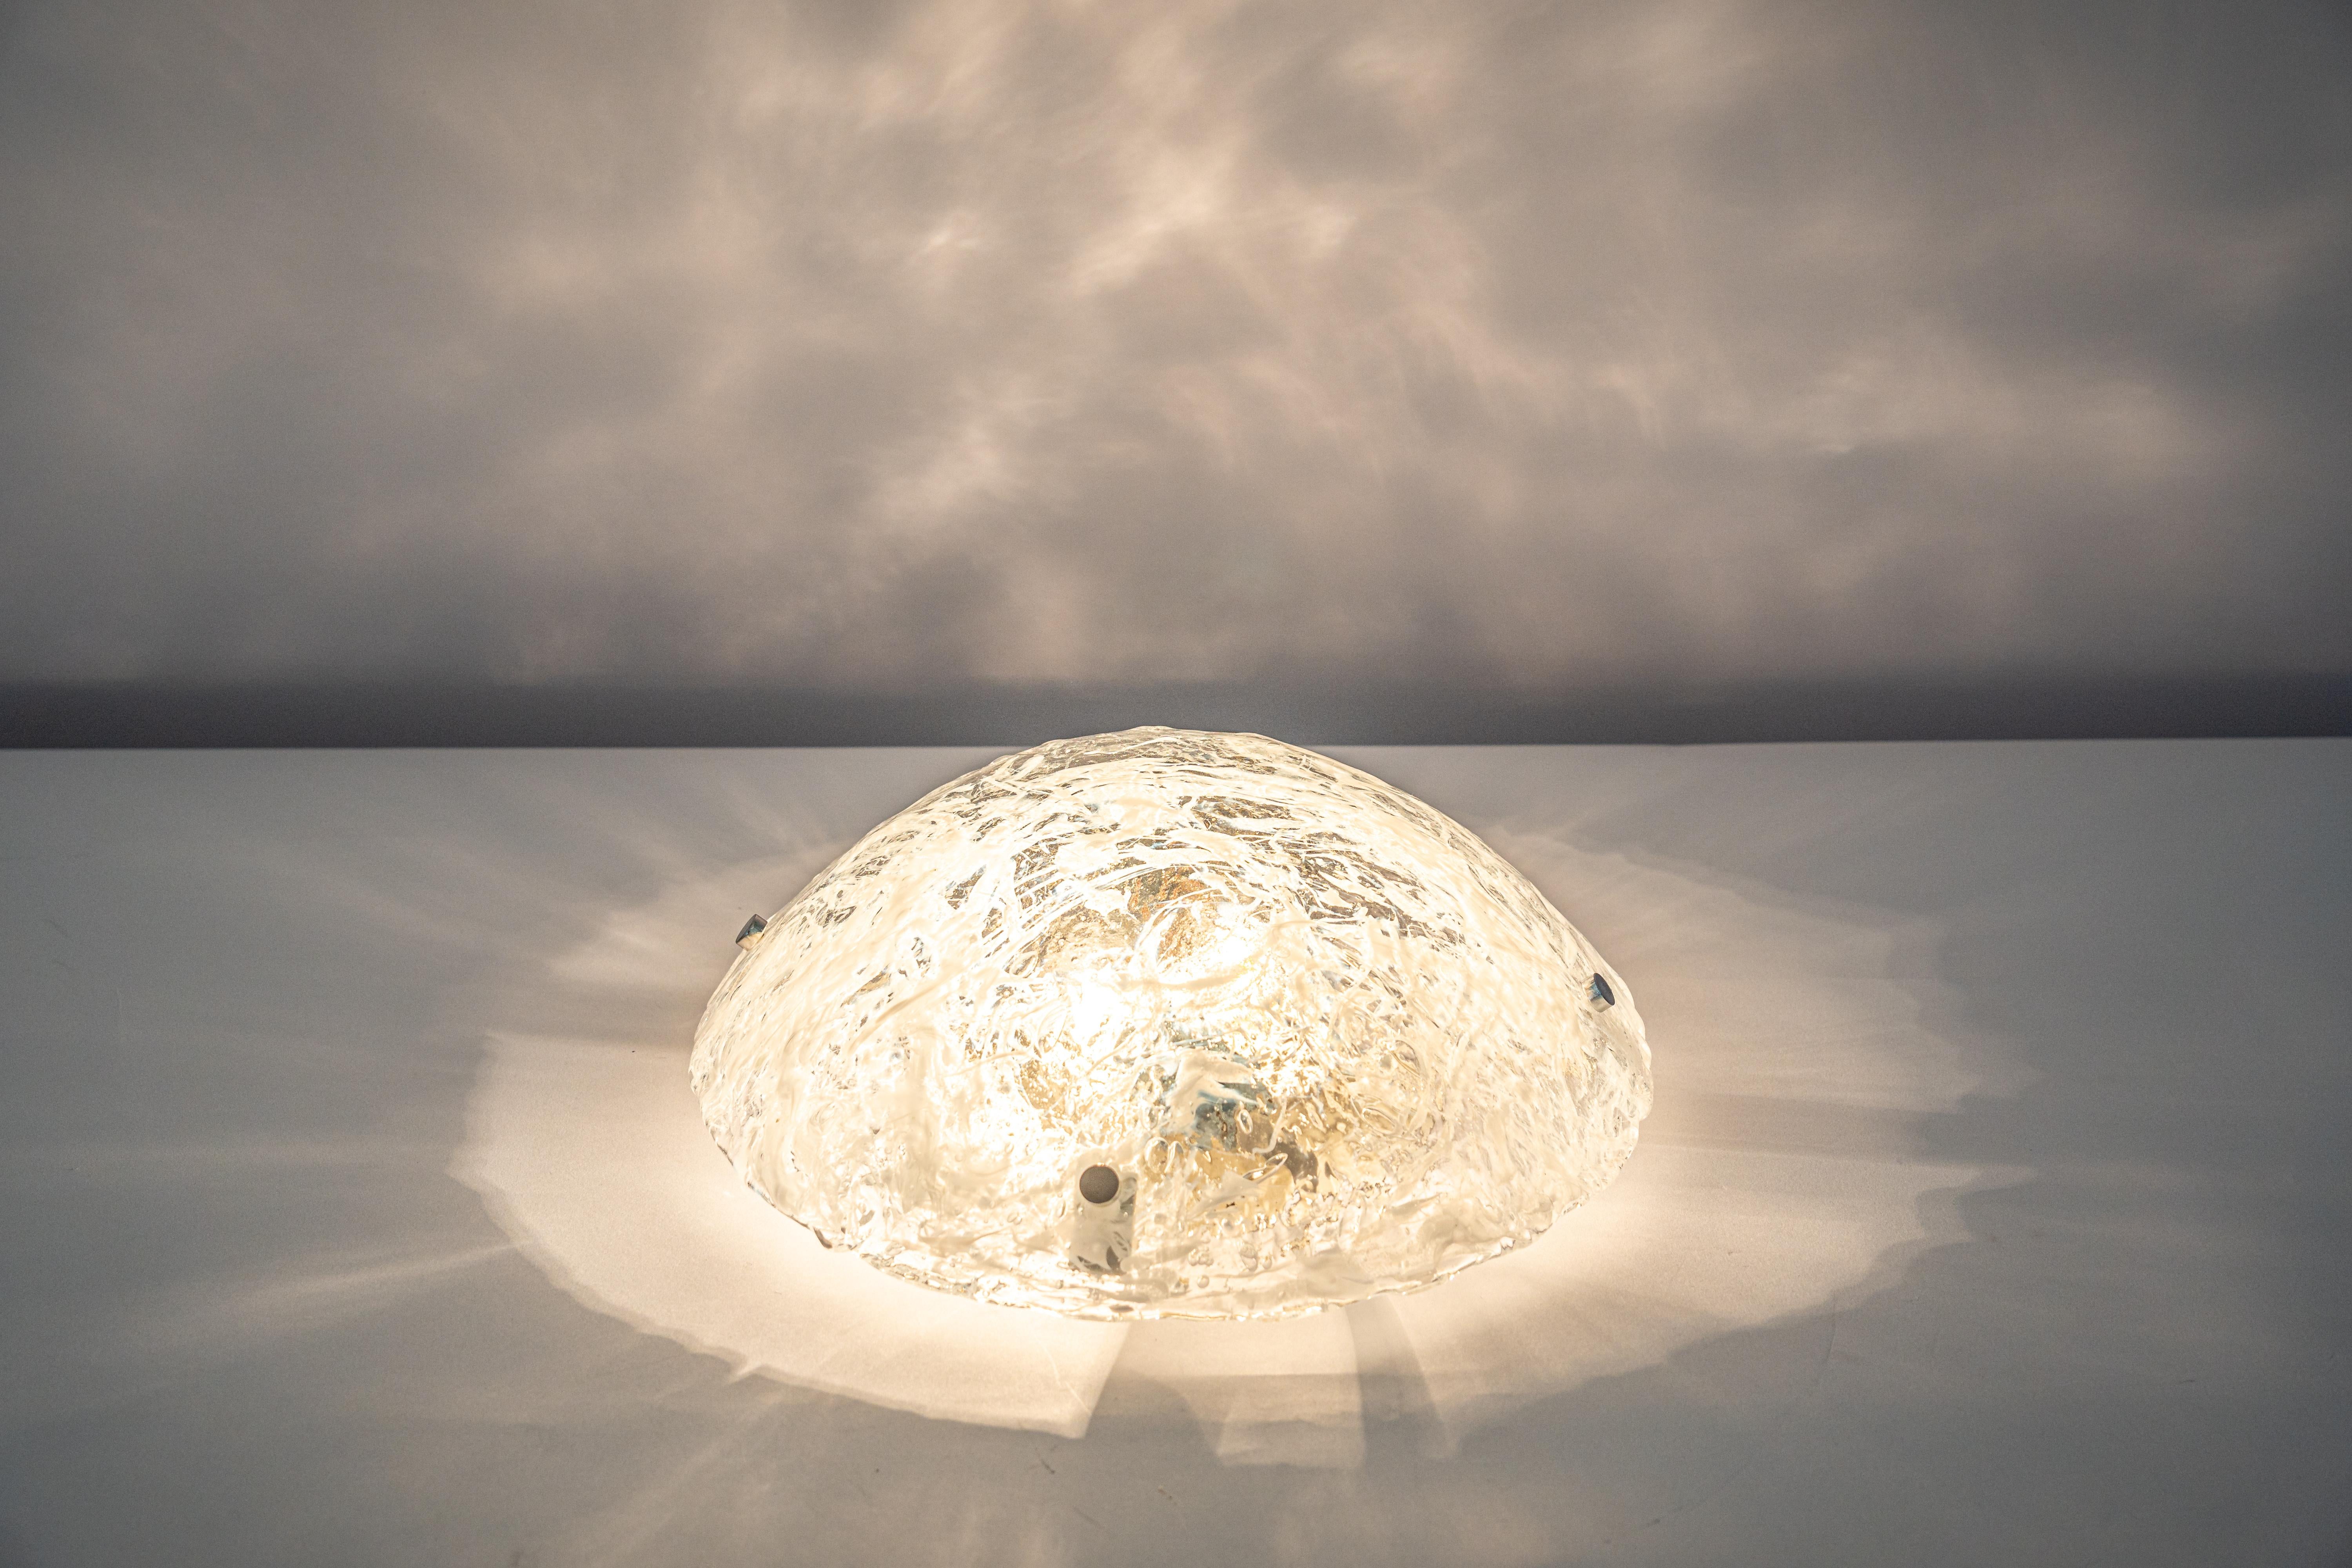 1 of 2 Large Venini Ceiling Lights Attributed to Carlo Scarpa for Venini, 1950s For Sale 1